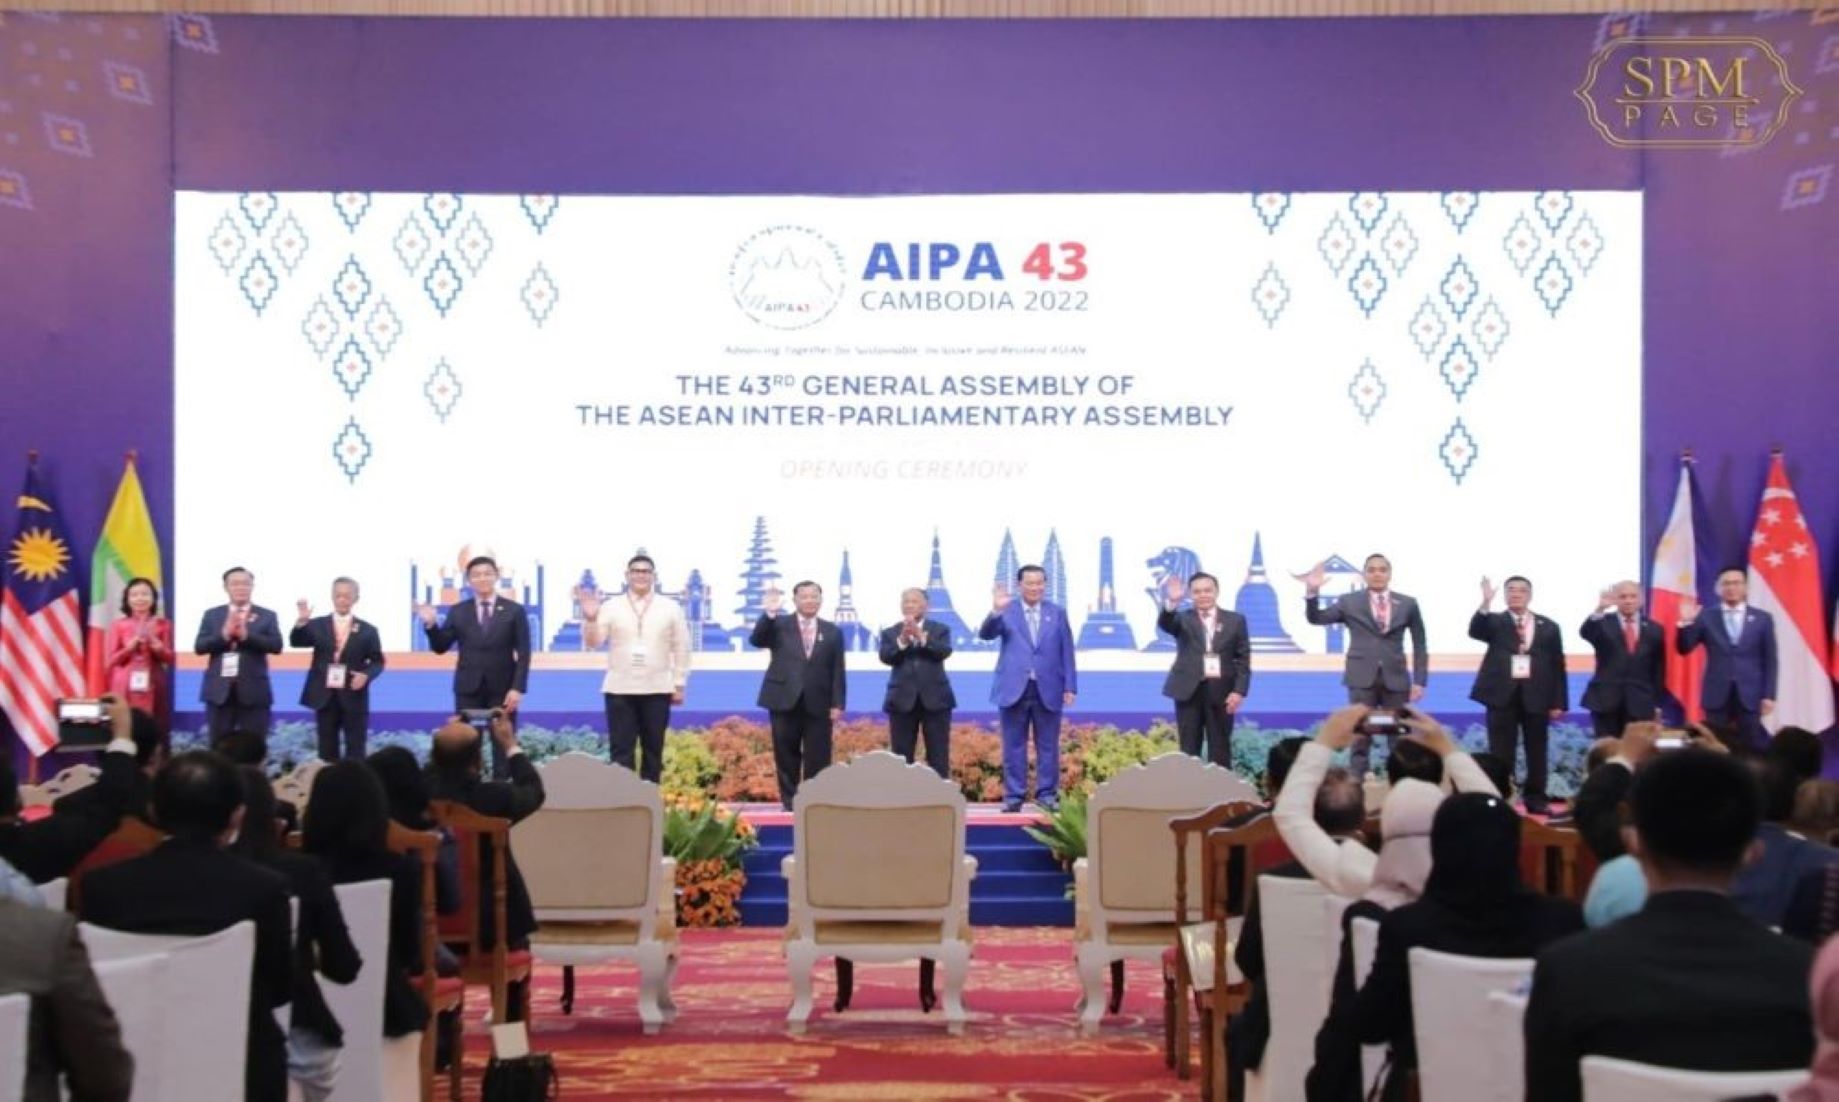 ASEAN Parliament Chiefs Expressed Will, To Build More Inclusive, Sustainable, Resilient Region